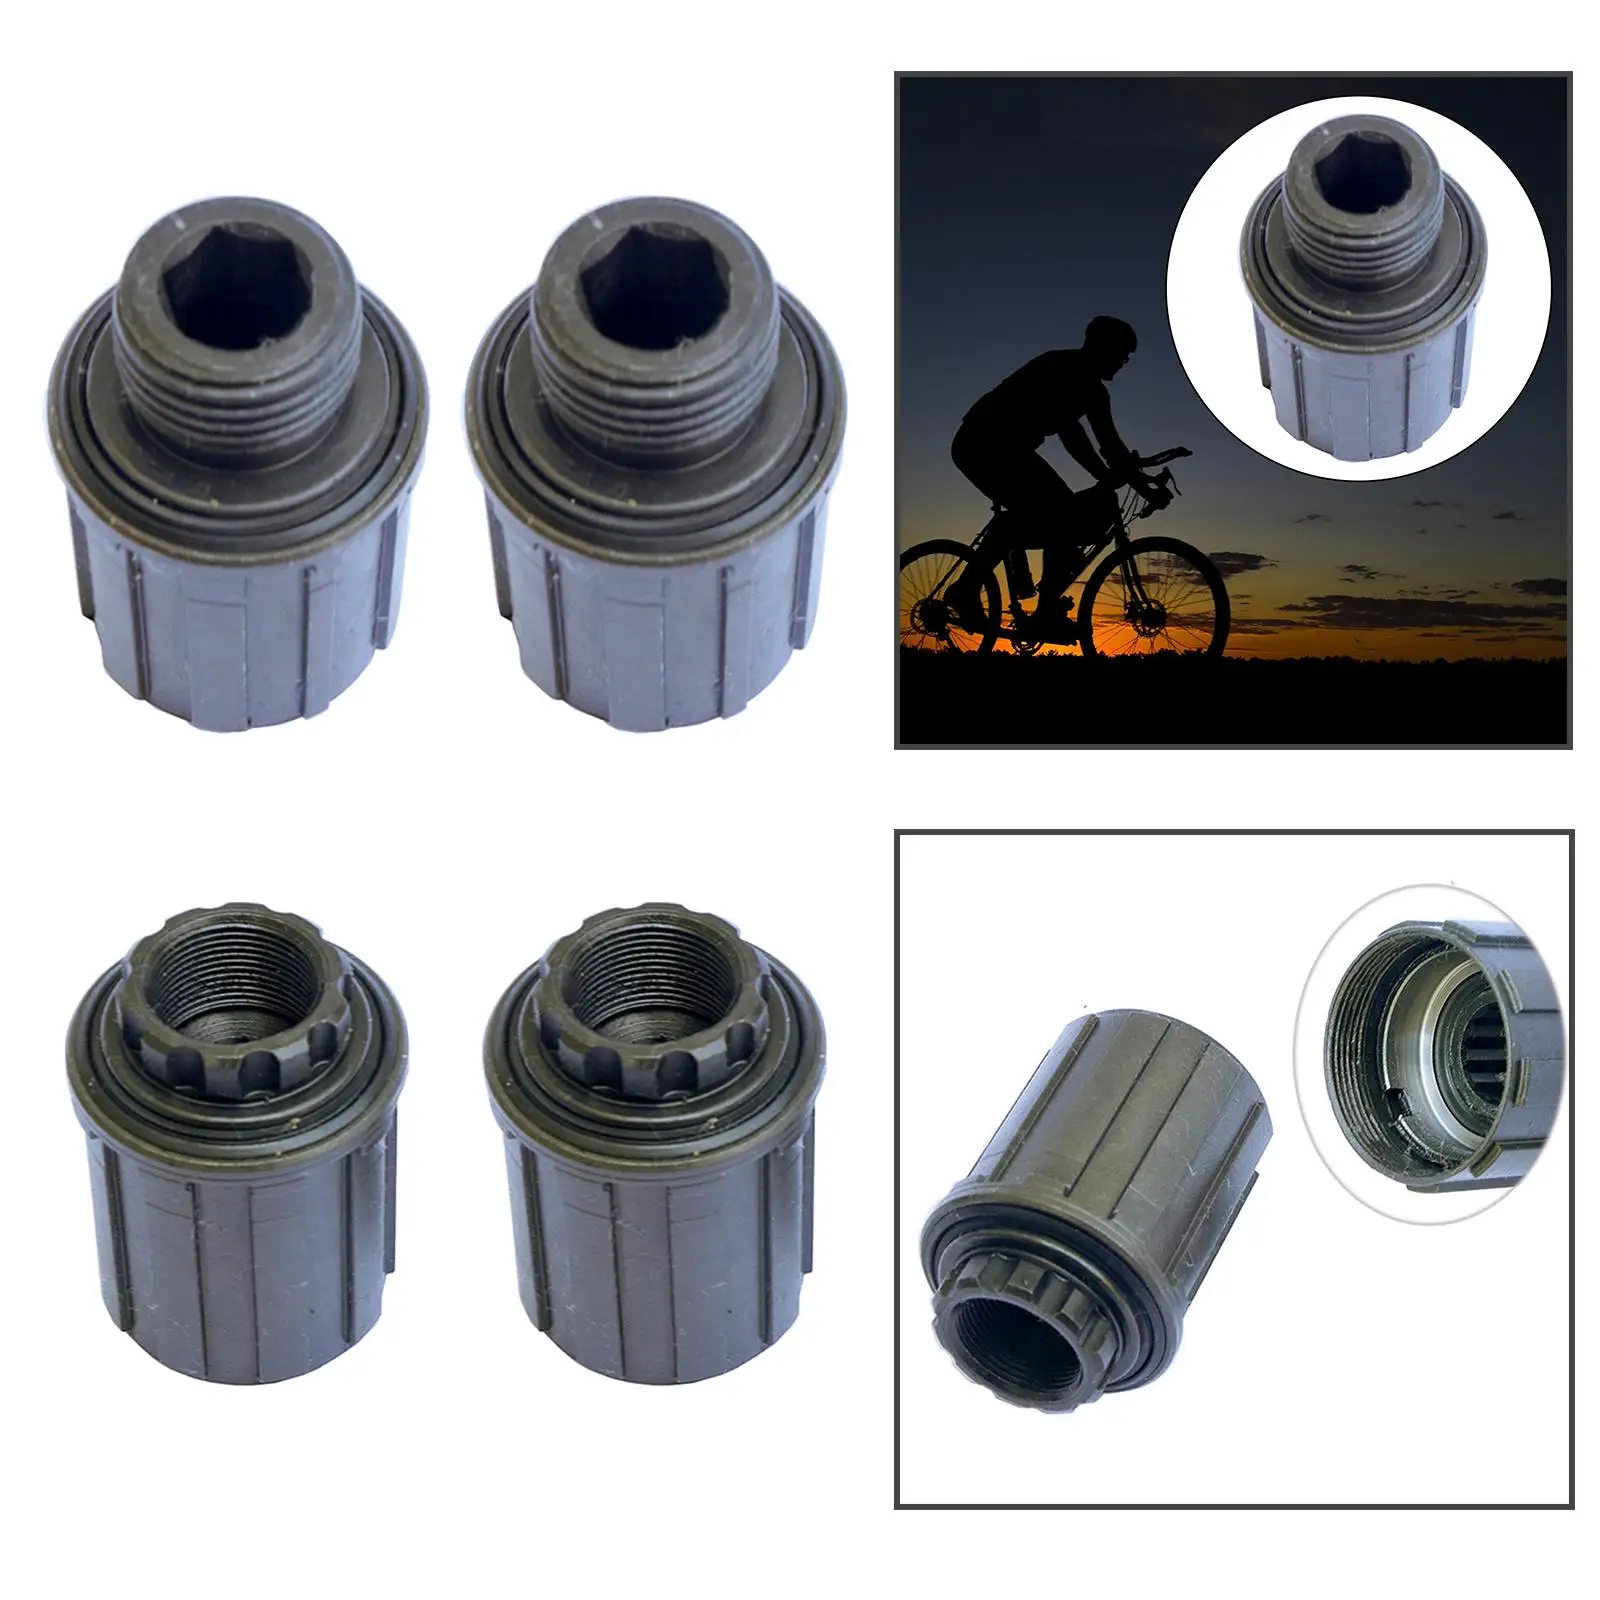 Durable Road Bike Freehub Body 7-10 Speed Cycling Accessories Cassette Flywheel Bicycle Free Hub Body Components Parts Solid